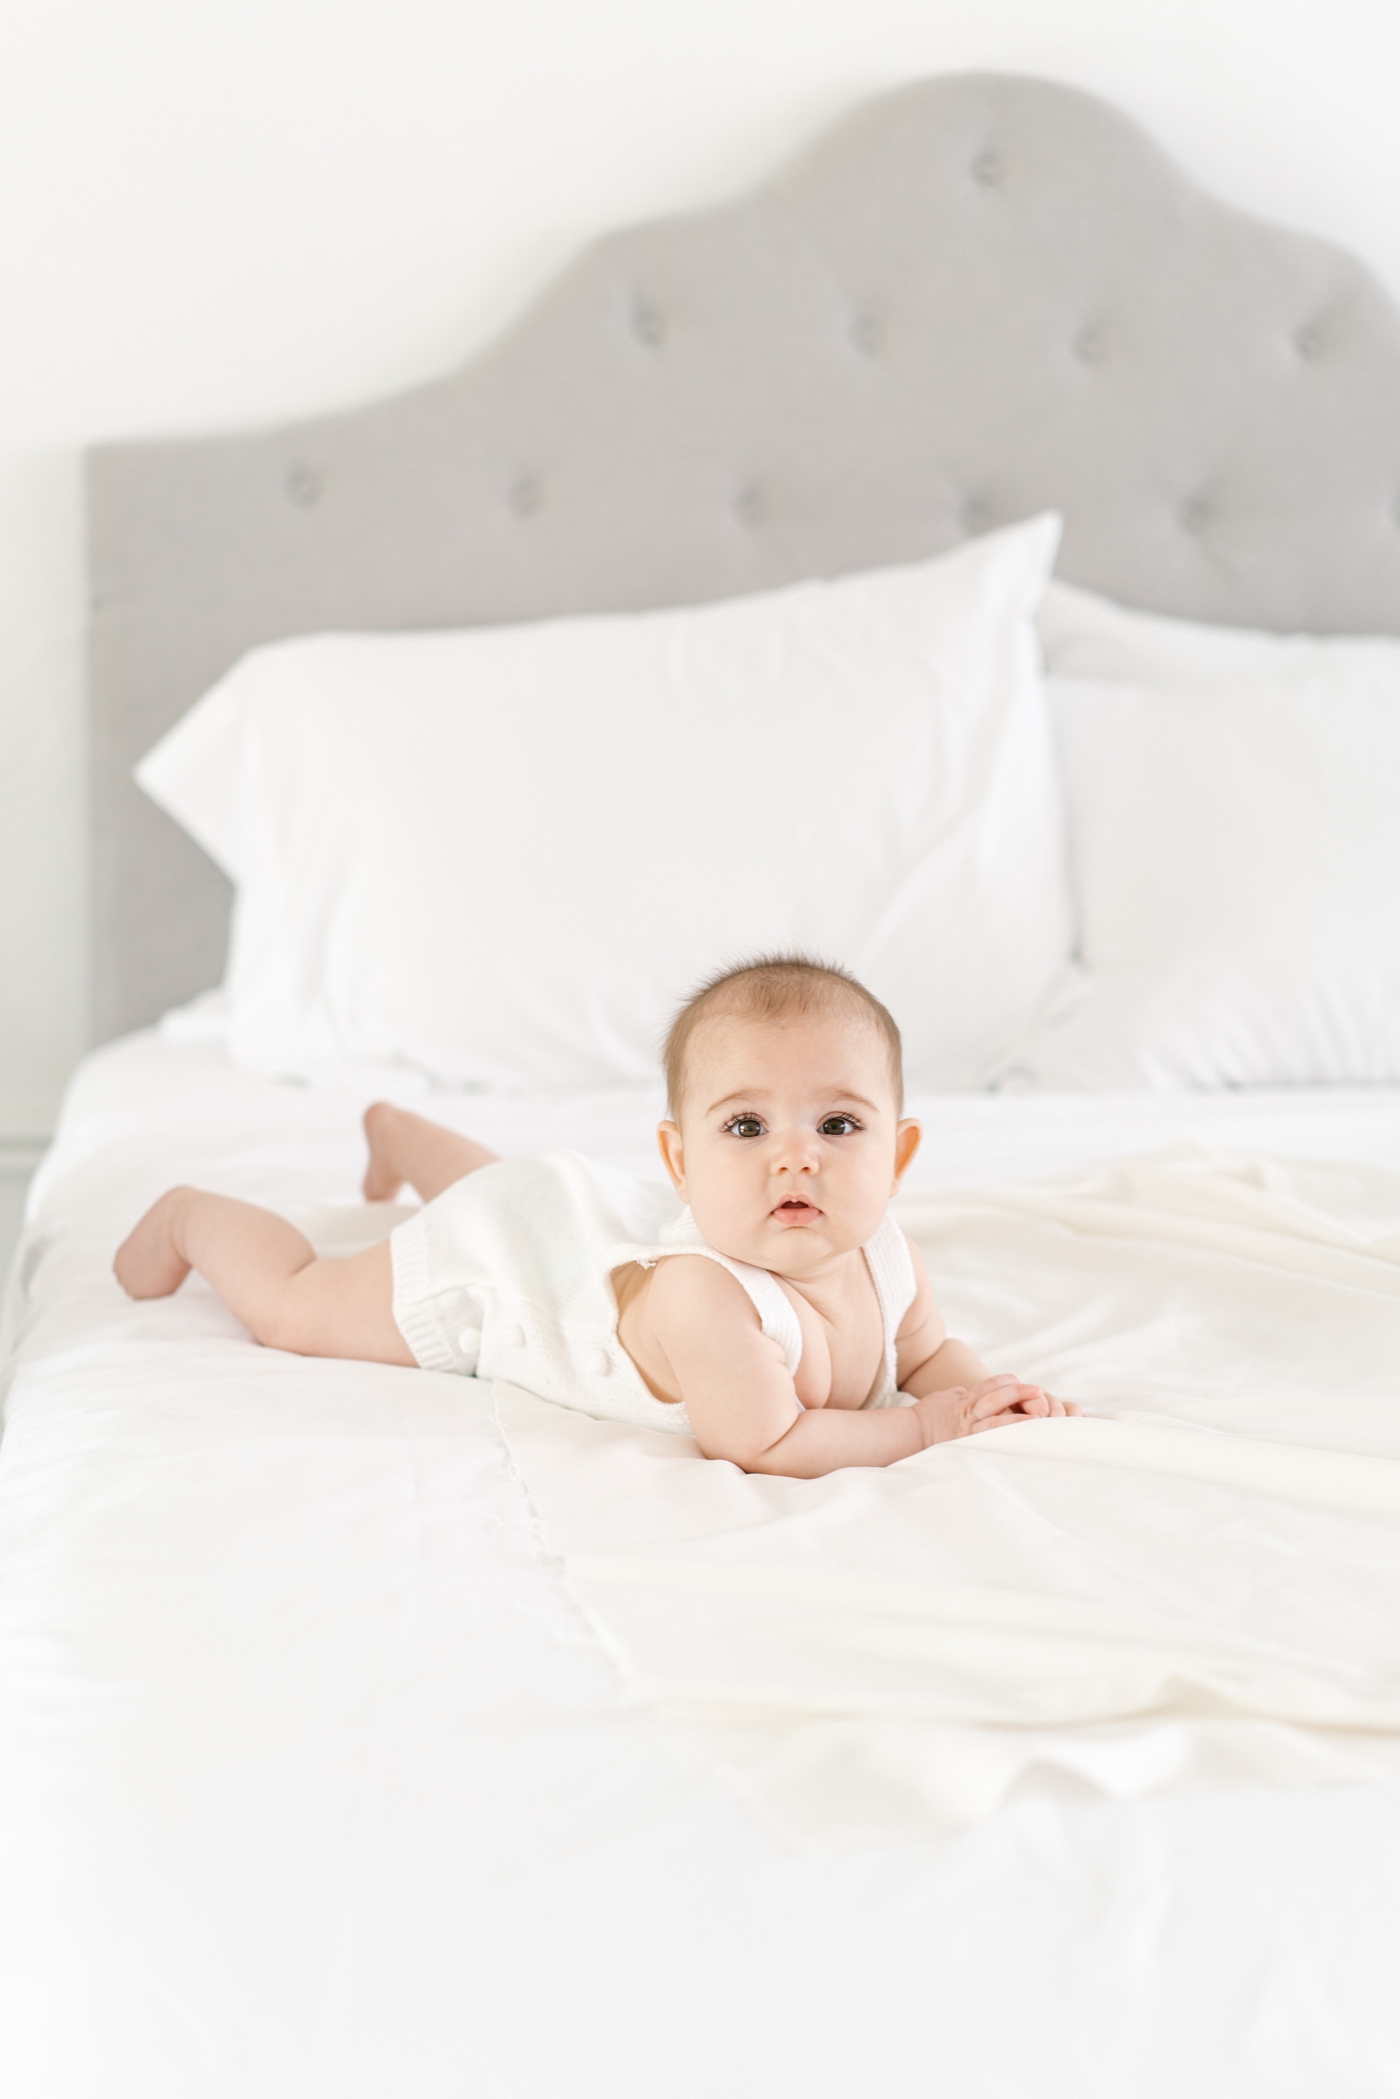 Baby doing tummy time on bed during 6 month milestone session in Asheville, NC. Photo by Lauren Sosler Photography.